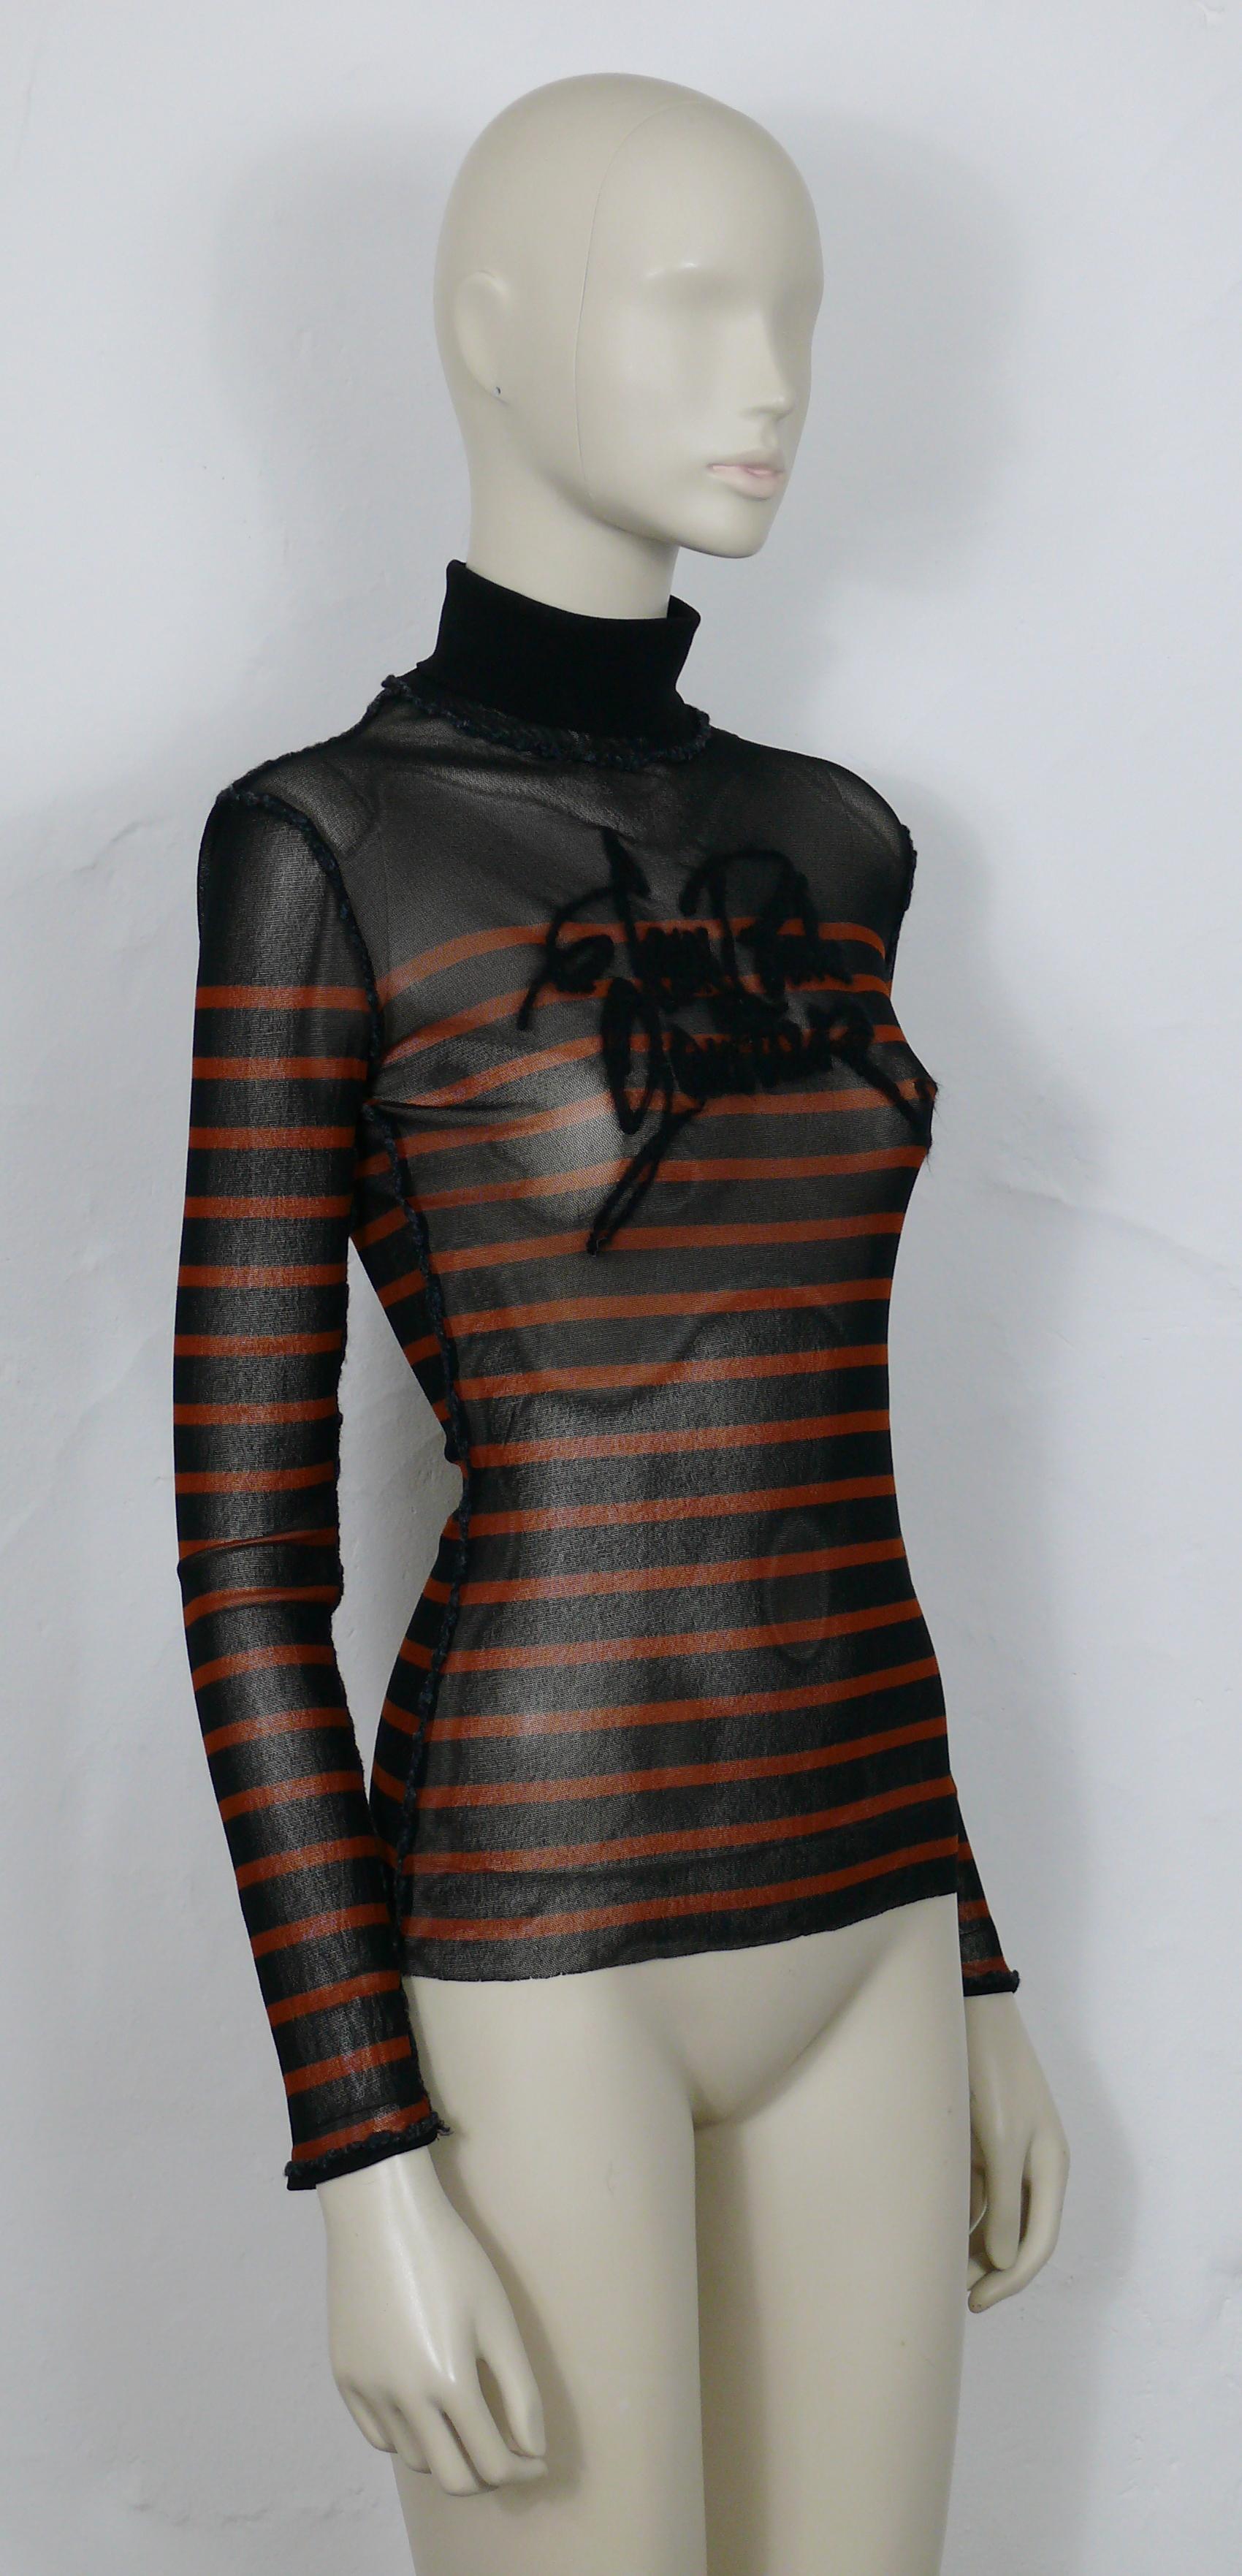 JEAN PAUL GAULTIER vintage black with brick color stripes sheer mesh matelot top with JEAN PAUL GAULTIER cursive signature.

Turtle neck collar.
Exposed seams.
Long sleeves.

Label reads JEAN PAUL GAULTIER Maille Femme.
Made in Italy.

Missing size